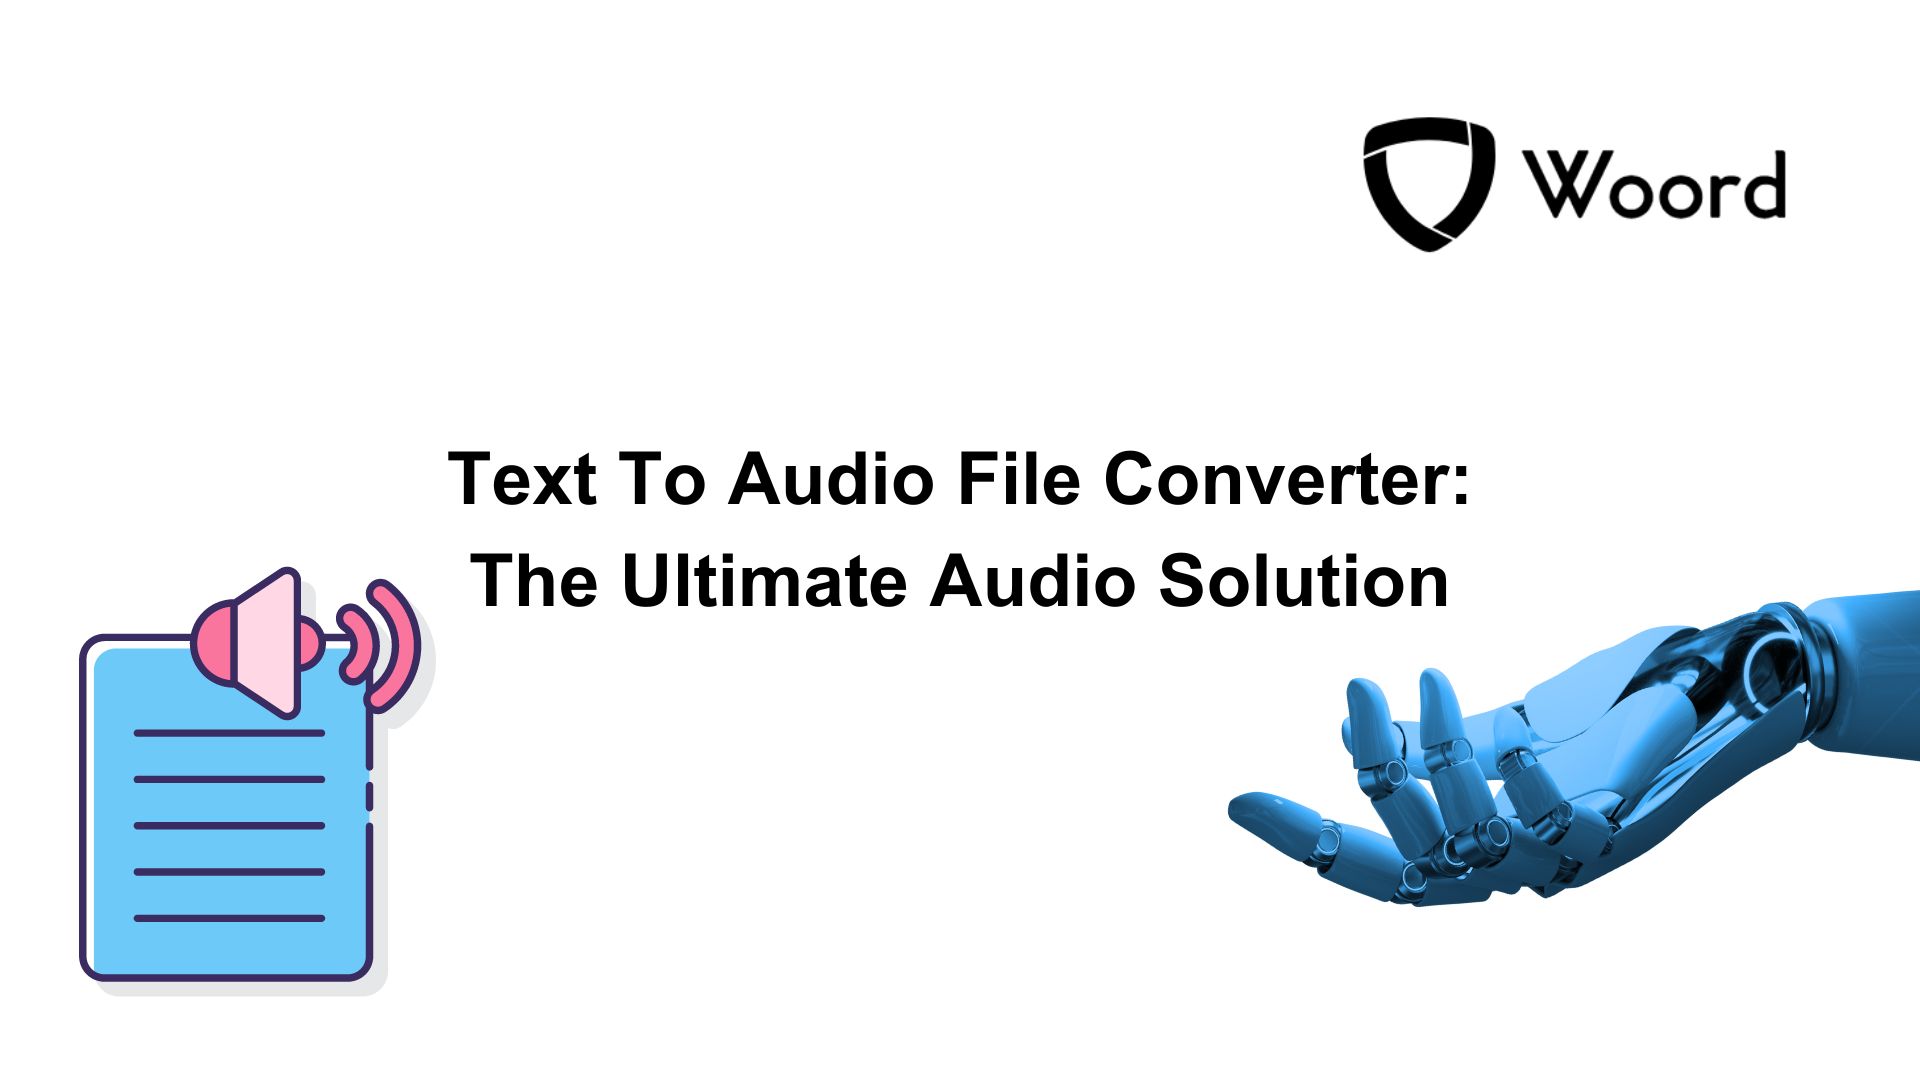 Text To Audio File Converter: The Ultimate Audio Solution